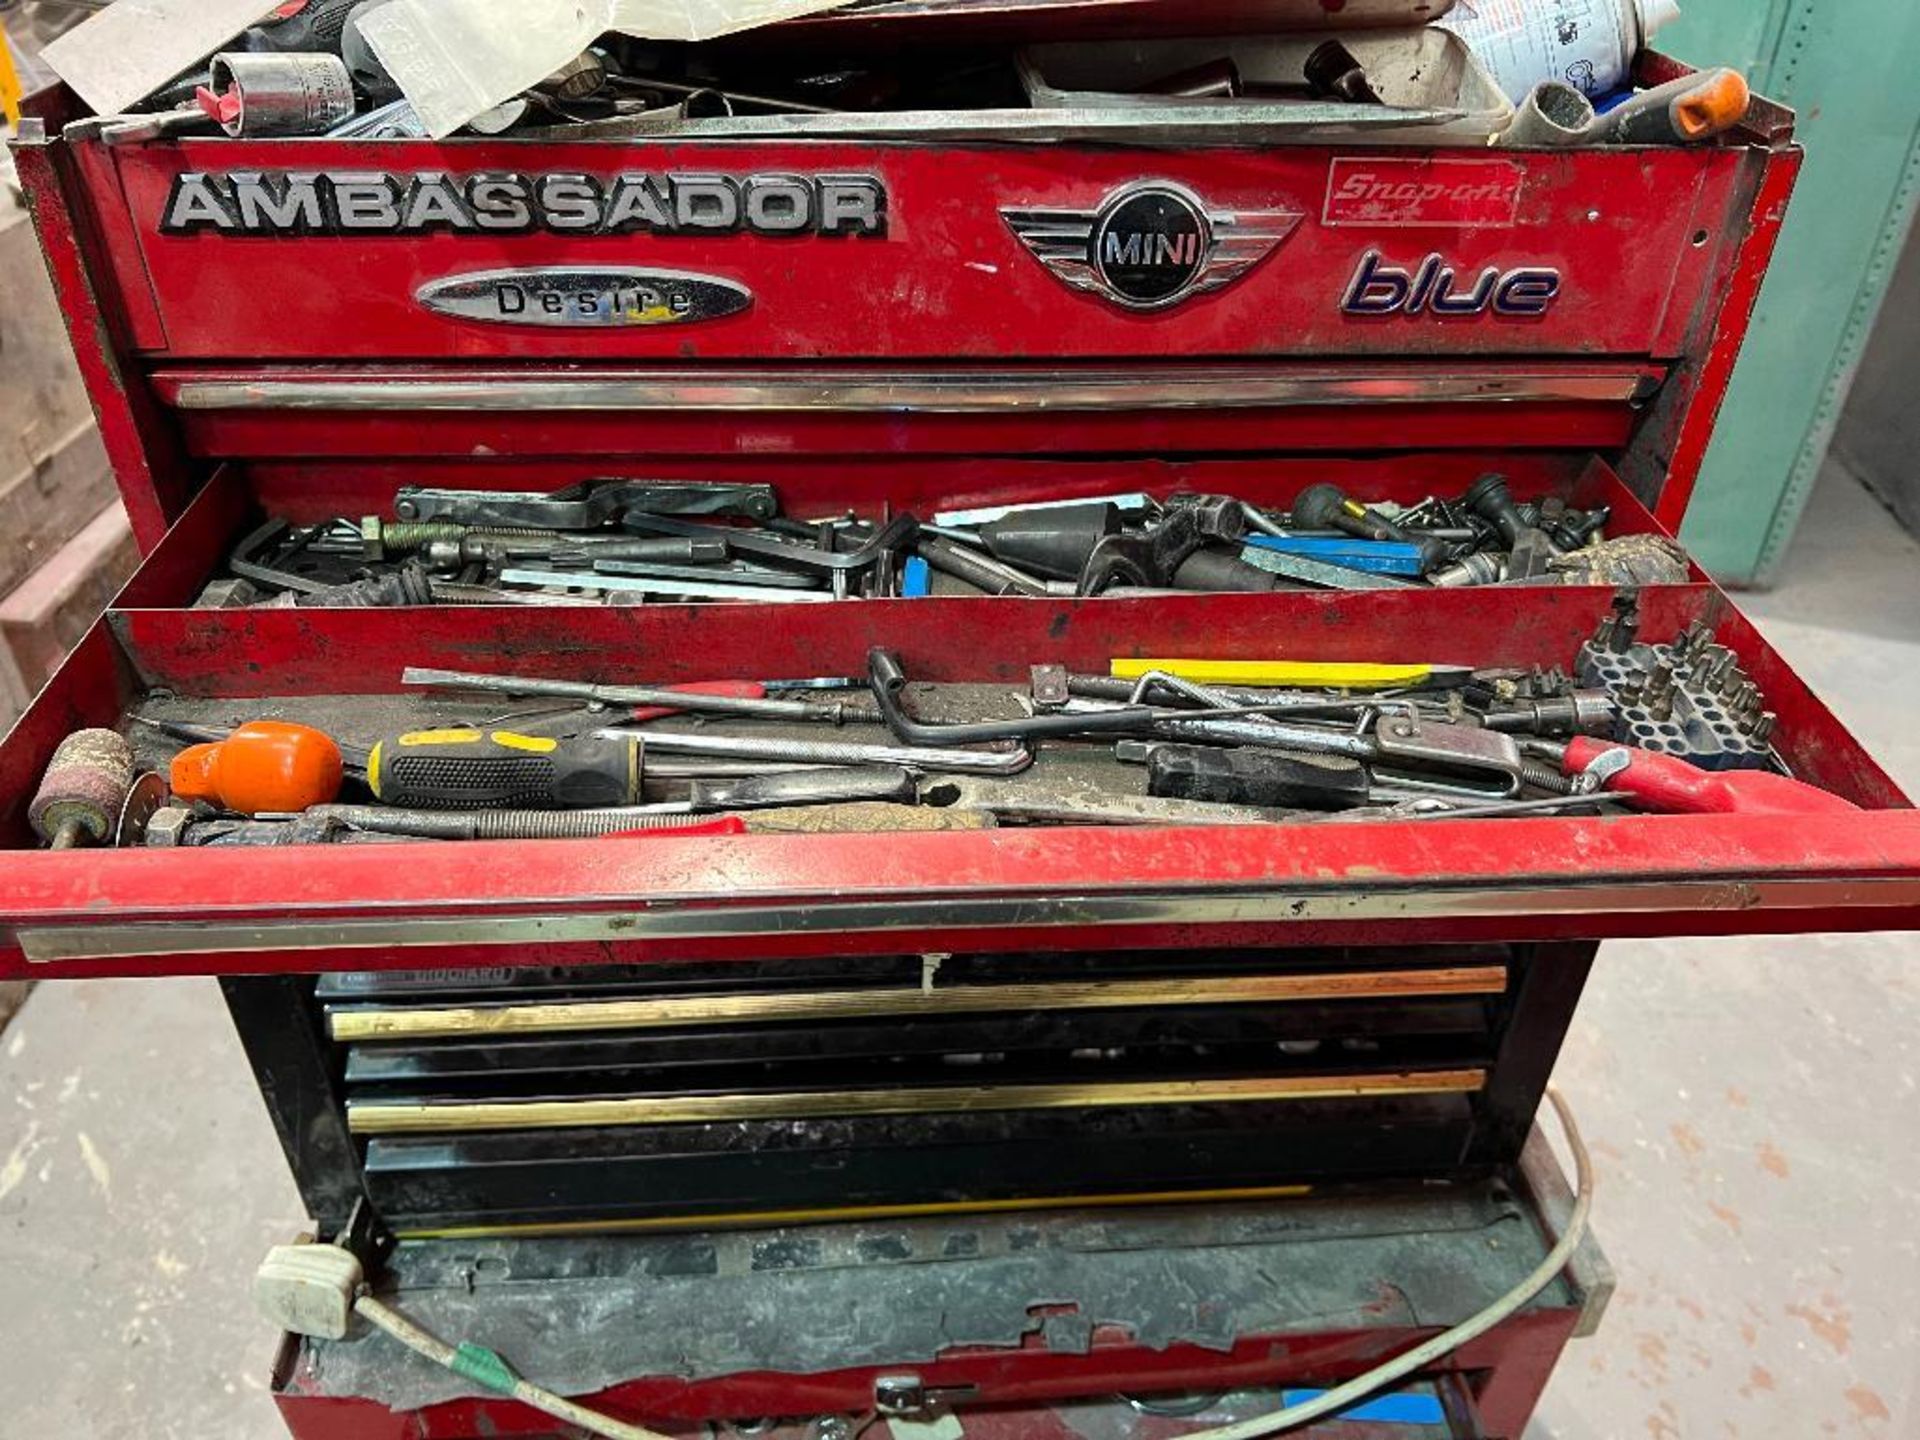 Mobile Tool Chest Comprising 3 Tool Boxes including contents as shown from Brands including Snap-On - Image 4 of 17